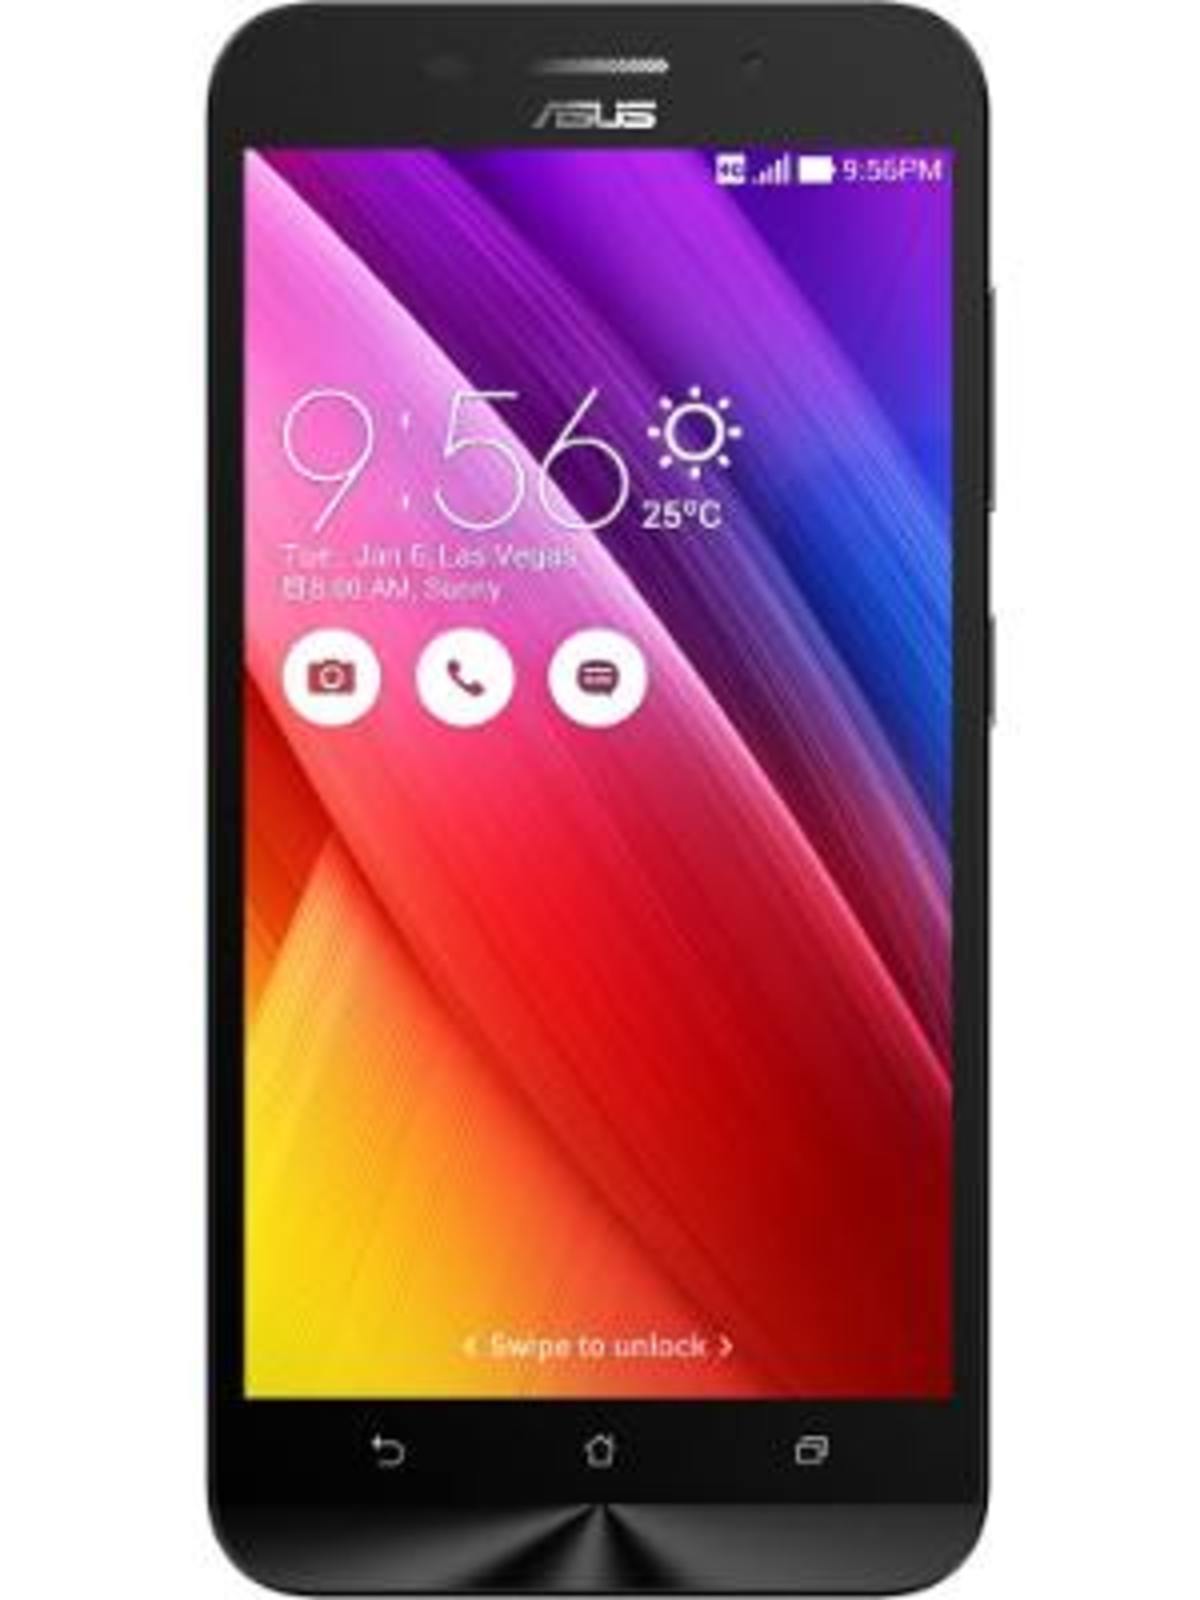 Asus Zenfone Max 2016 3GB RAM Price in India, Full Specifications (30th Oct at Gadgets